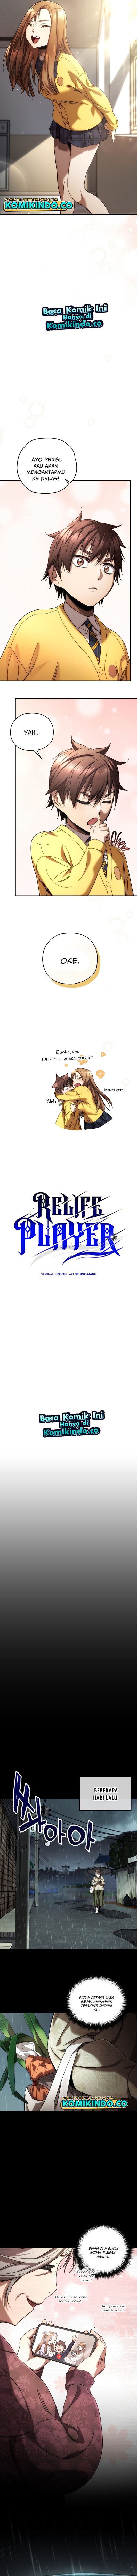 Re: Life Player Chapter 39